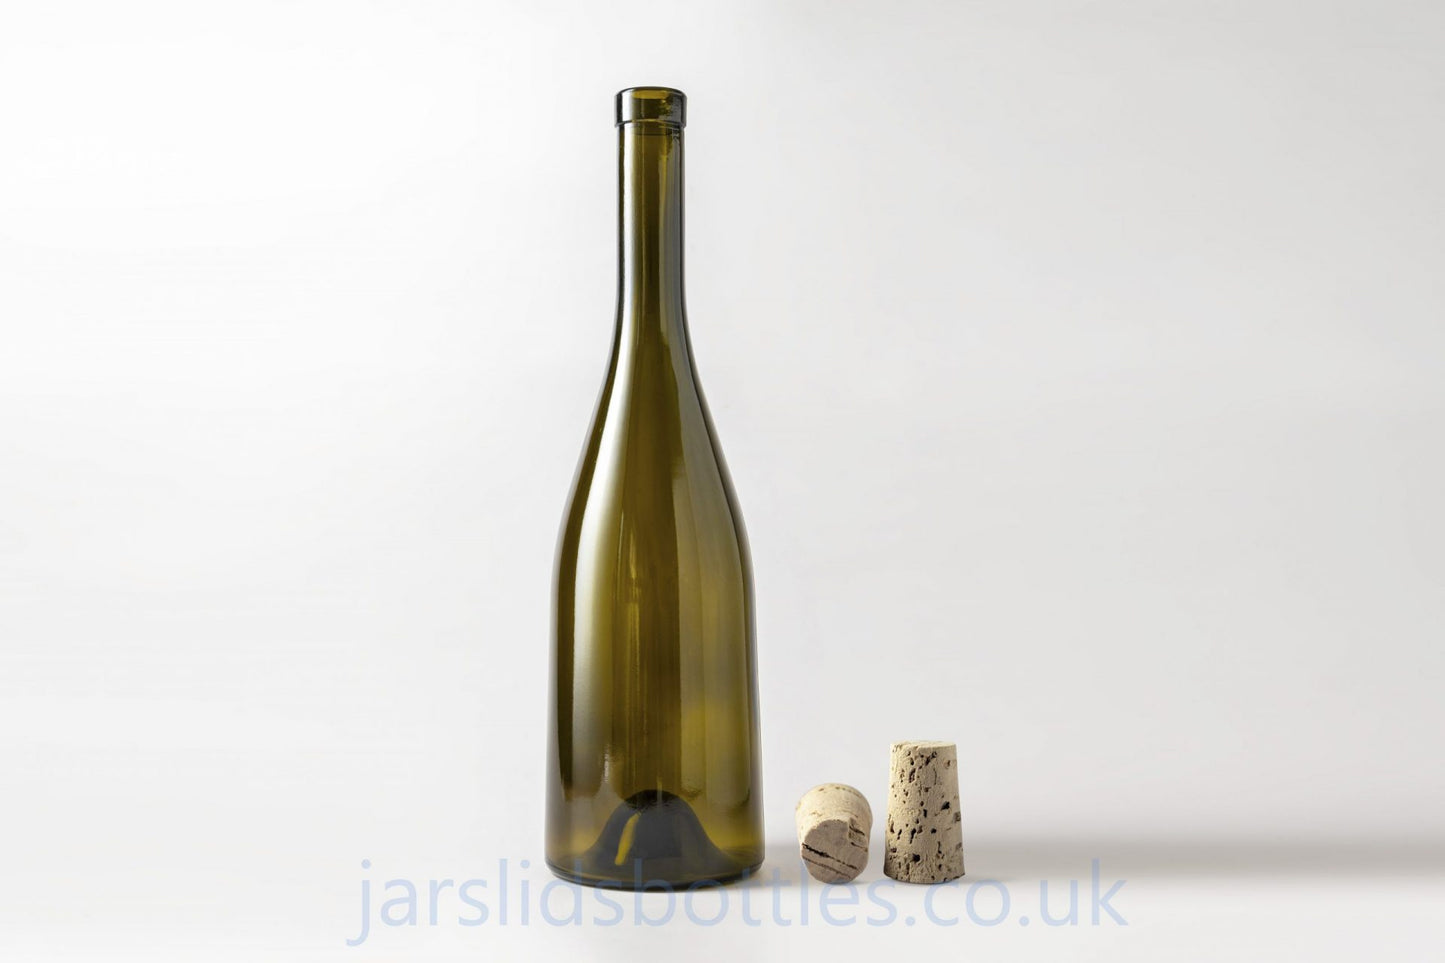 Wine bottle 0.75 L Espanola UVAG. Coming with cork.